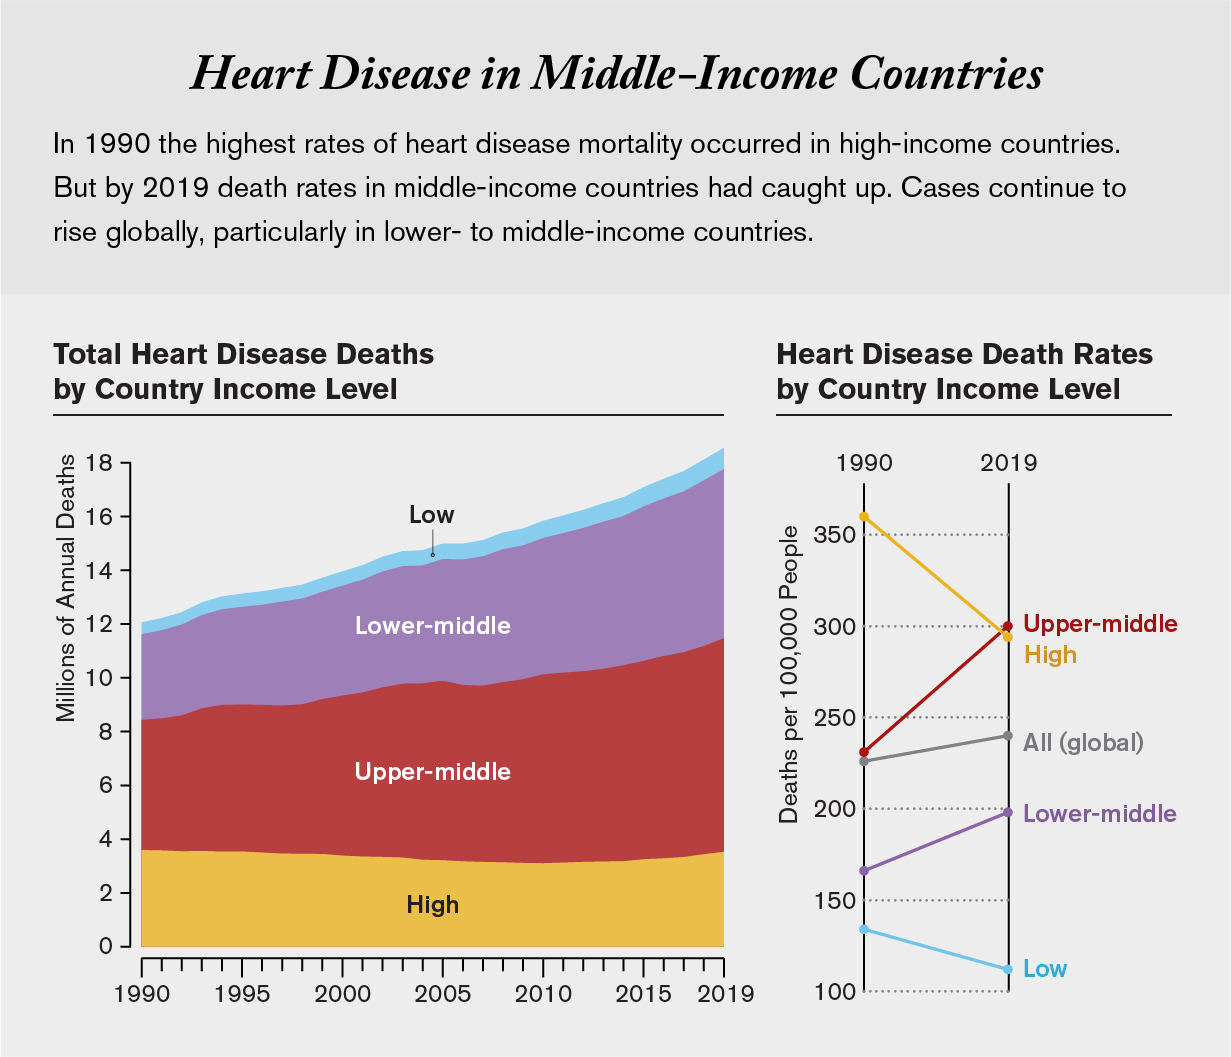 Charts show total deaths and death rates from heart disease by country income level from 1990 to 2019.